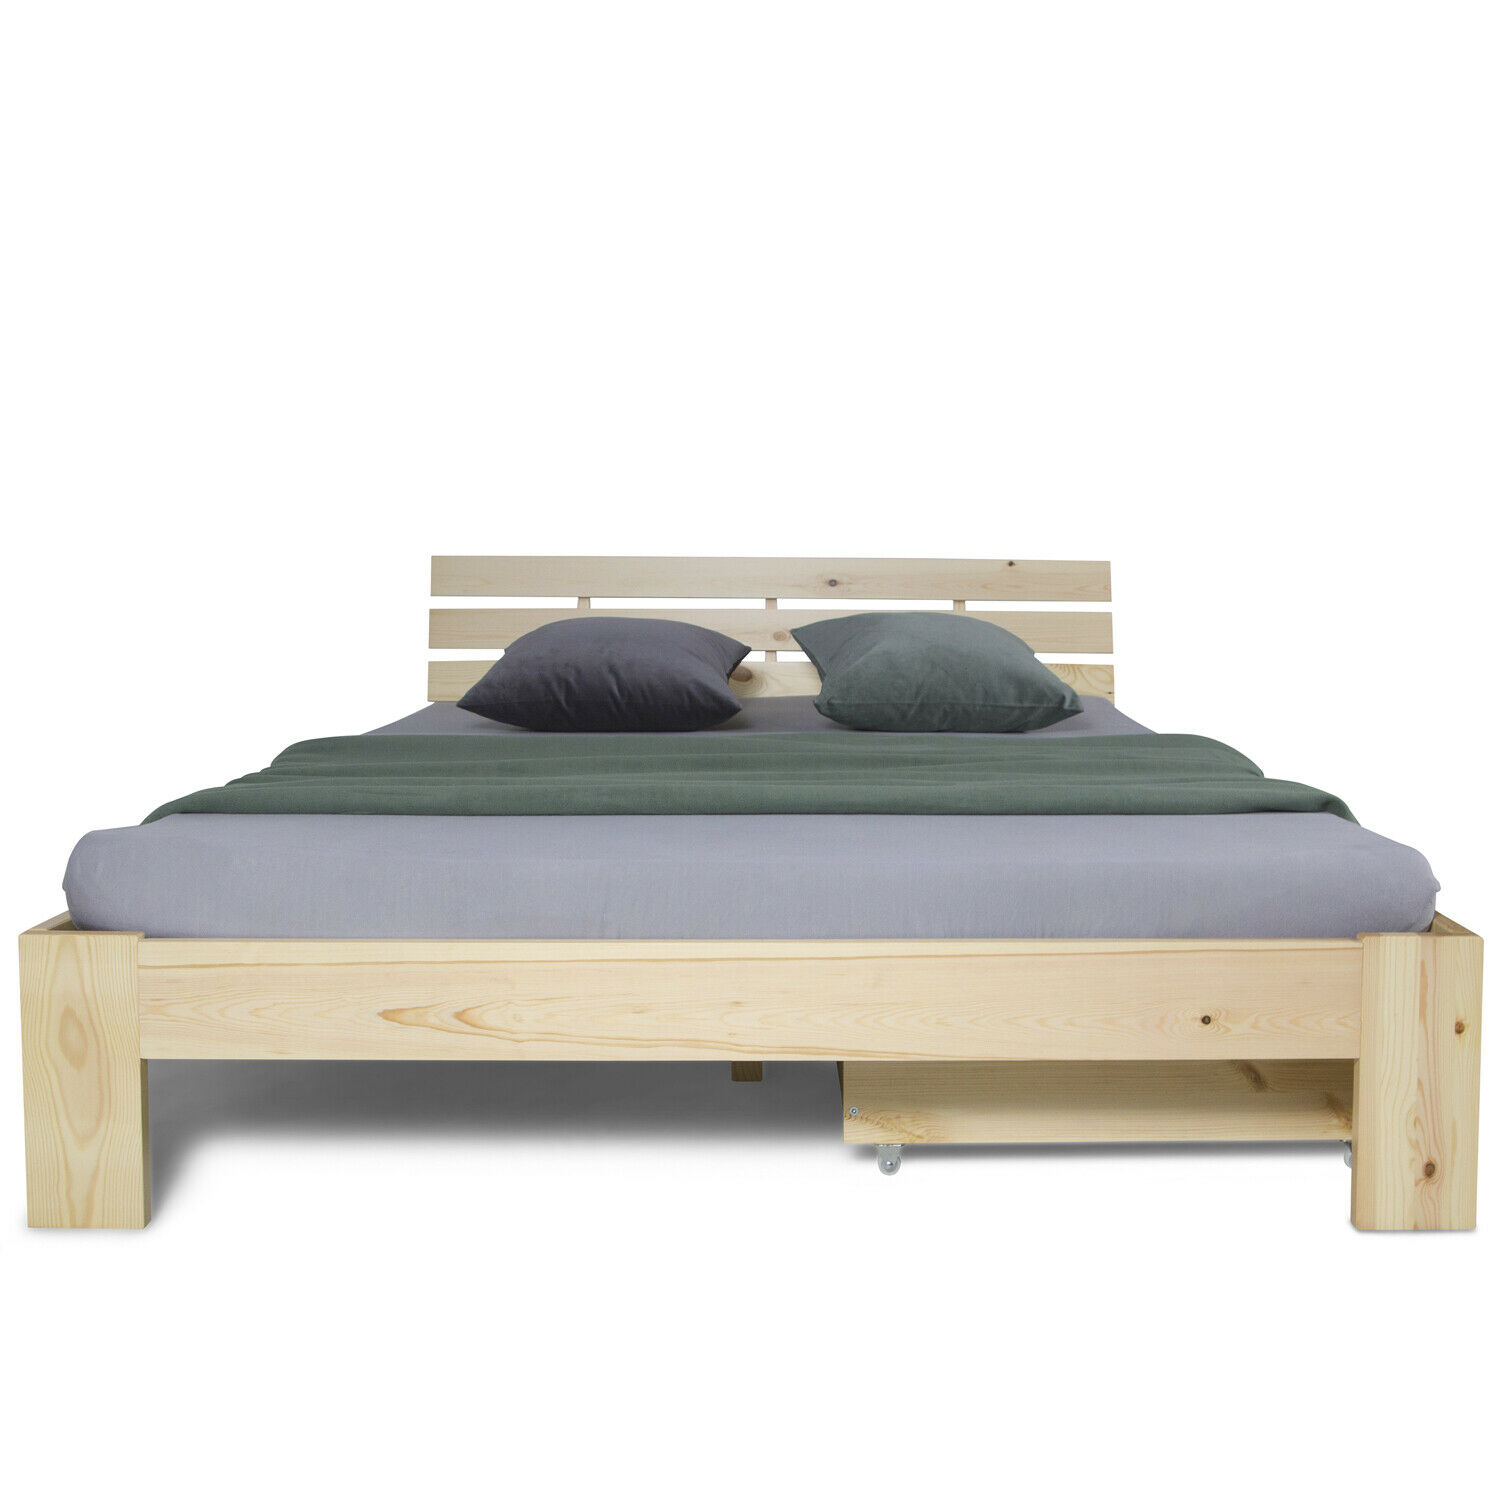 Wooden Bed Drawer Pull-Out Bed Box Storage with Castors Natural